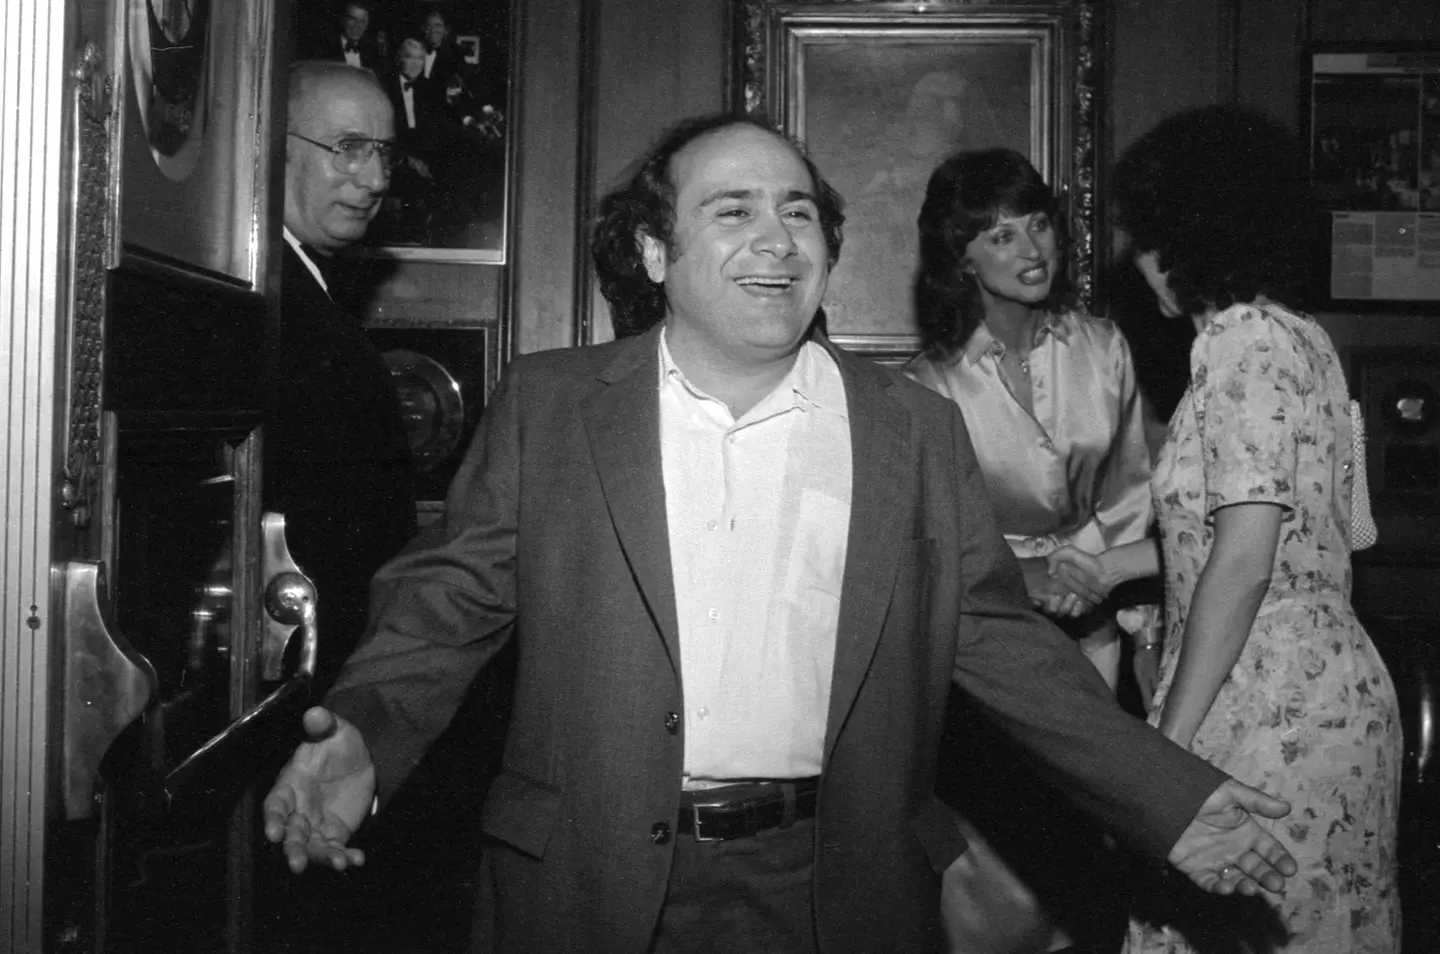 DeVito used to work in his sister's beauty salon when he was younger, and cut his clients hair even after they died.